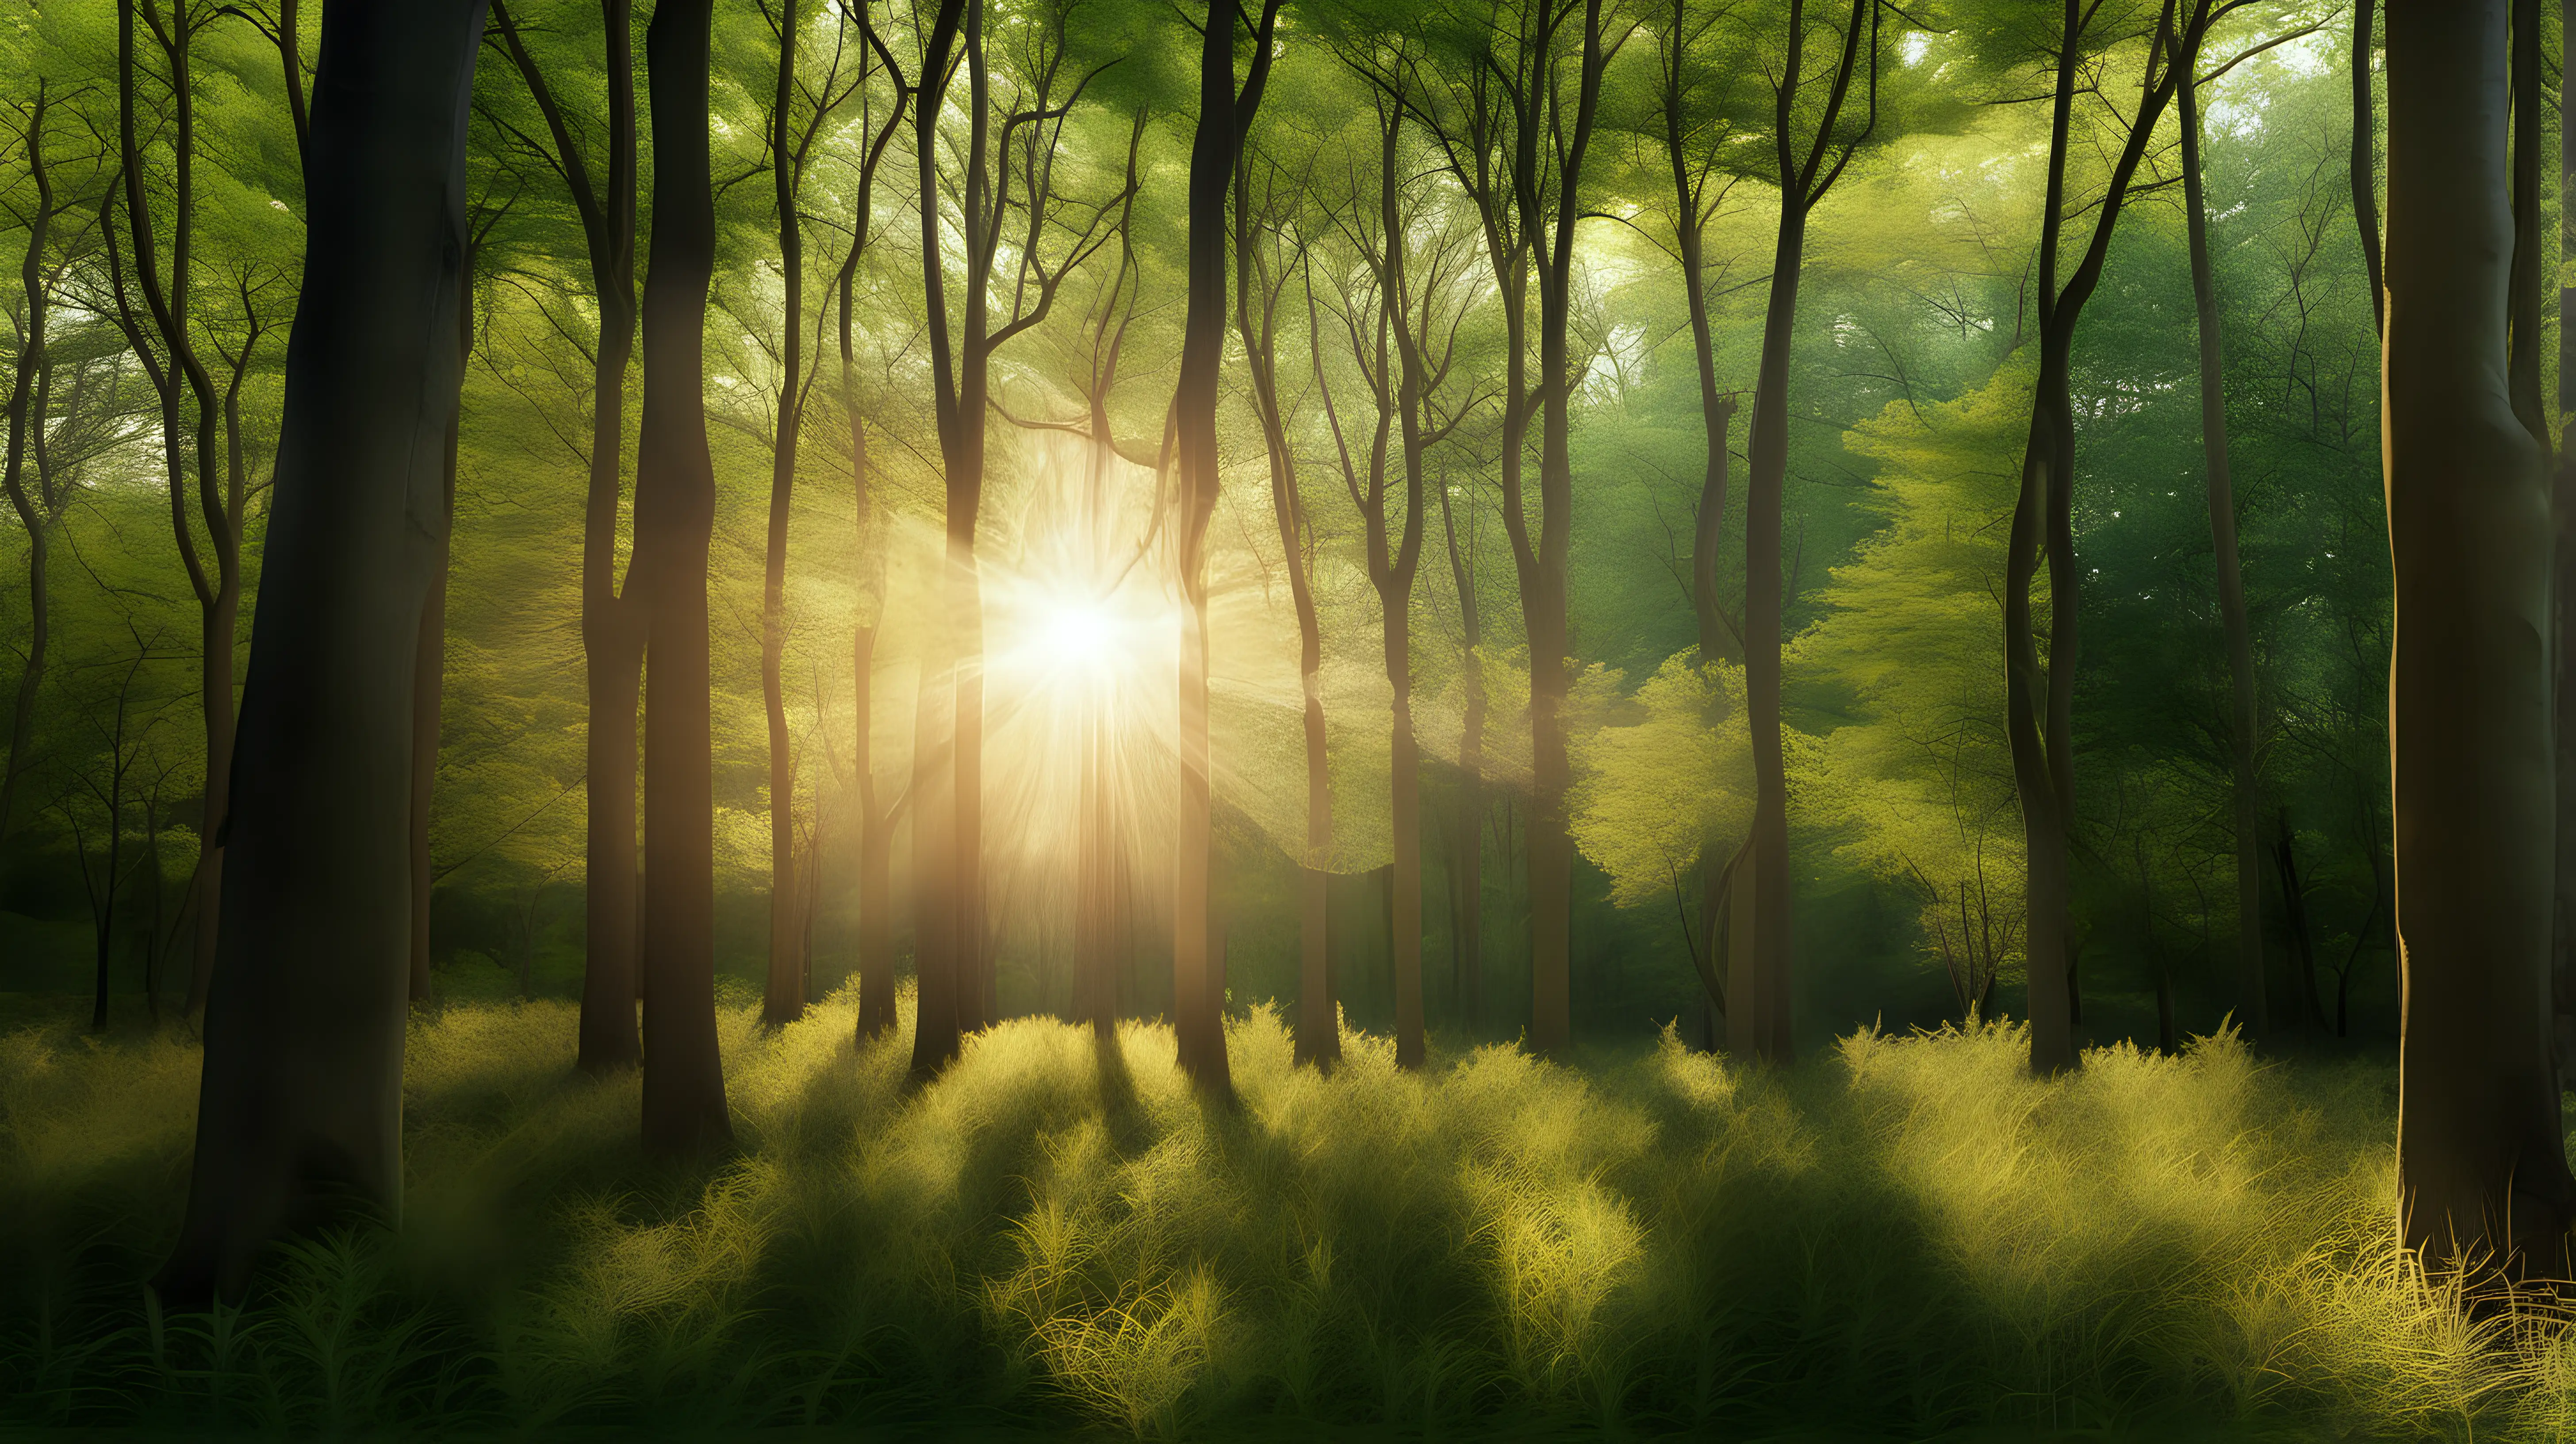 Fantasy Forest - Magic Forest - Elven Forest - Stylized Forest in